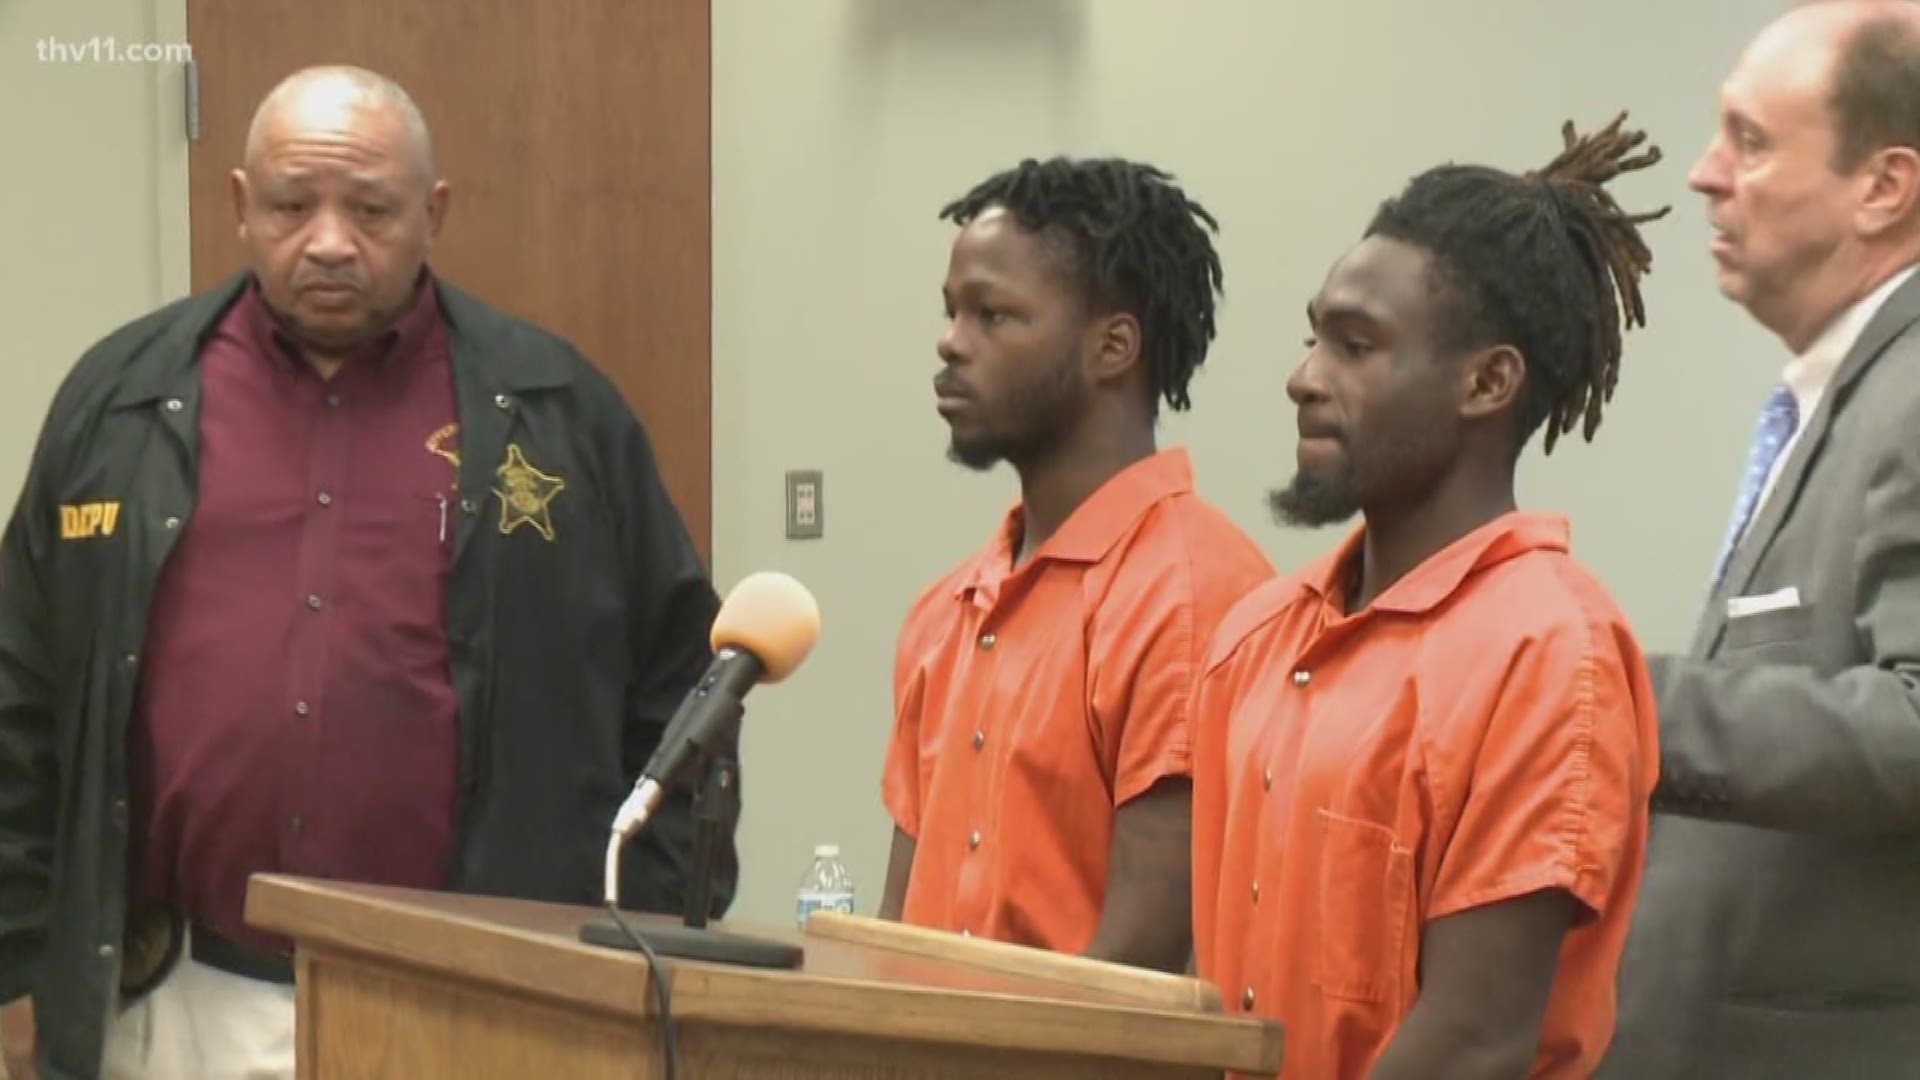 The two men accused of killing a Pine Bluff pawn shop owner last November will also face federal charges.